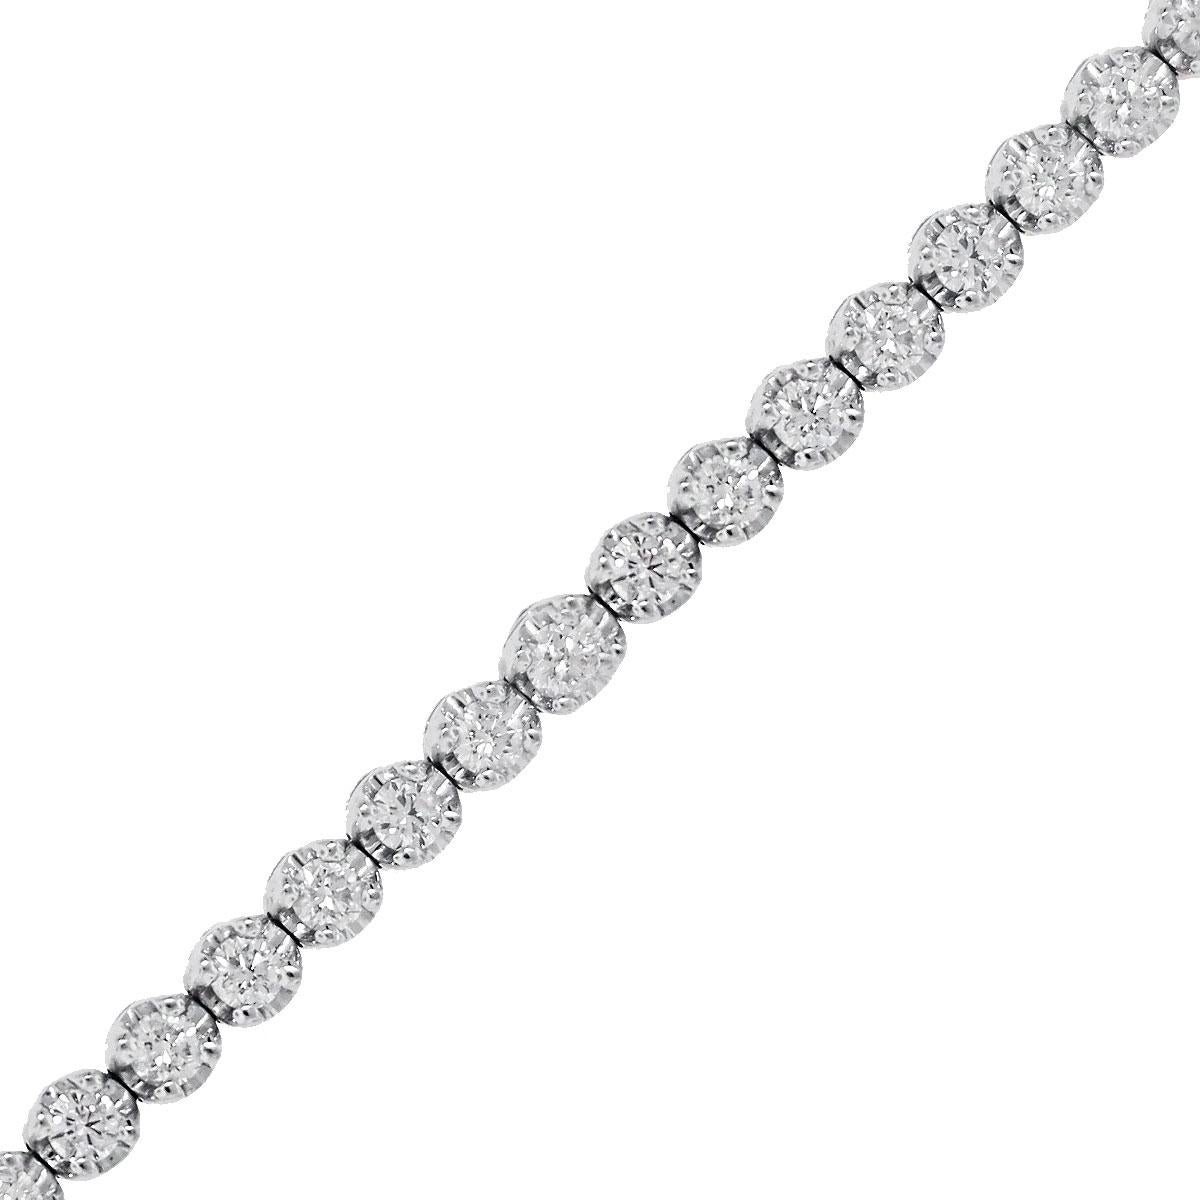 Material: 18k White Gold
Diamond Details: Approximately 1.50ctw round brilliant diamonds. Diamonds are H/I in color and SI1 - SI2 in clarity.
Clasps: Tongue in box with safety latch
Total Weight: 6.9g (4.4dwt)
Length: 6.5